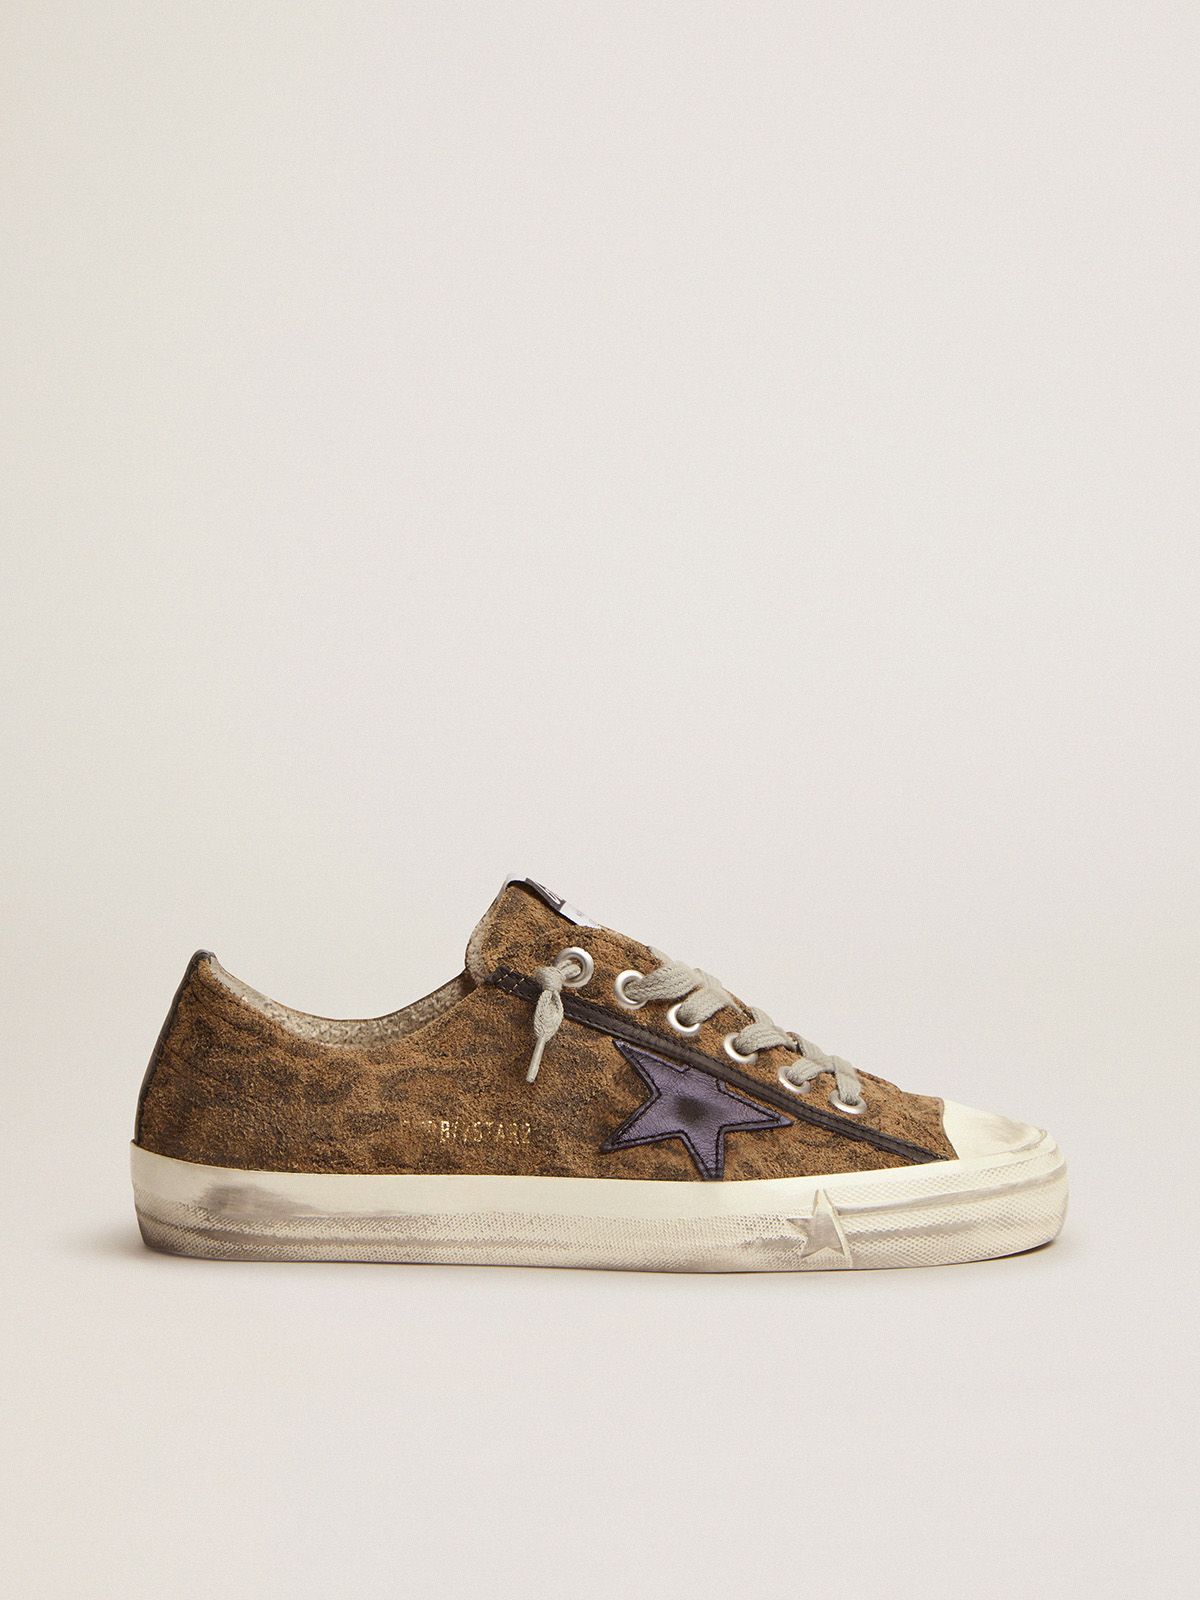 golden goose black suede star a leather sneakers laminated with leopard-print in LTD V-star